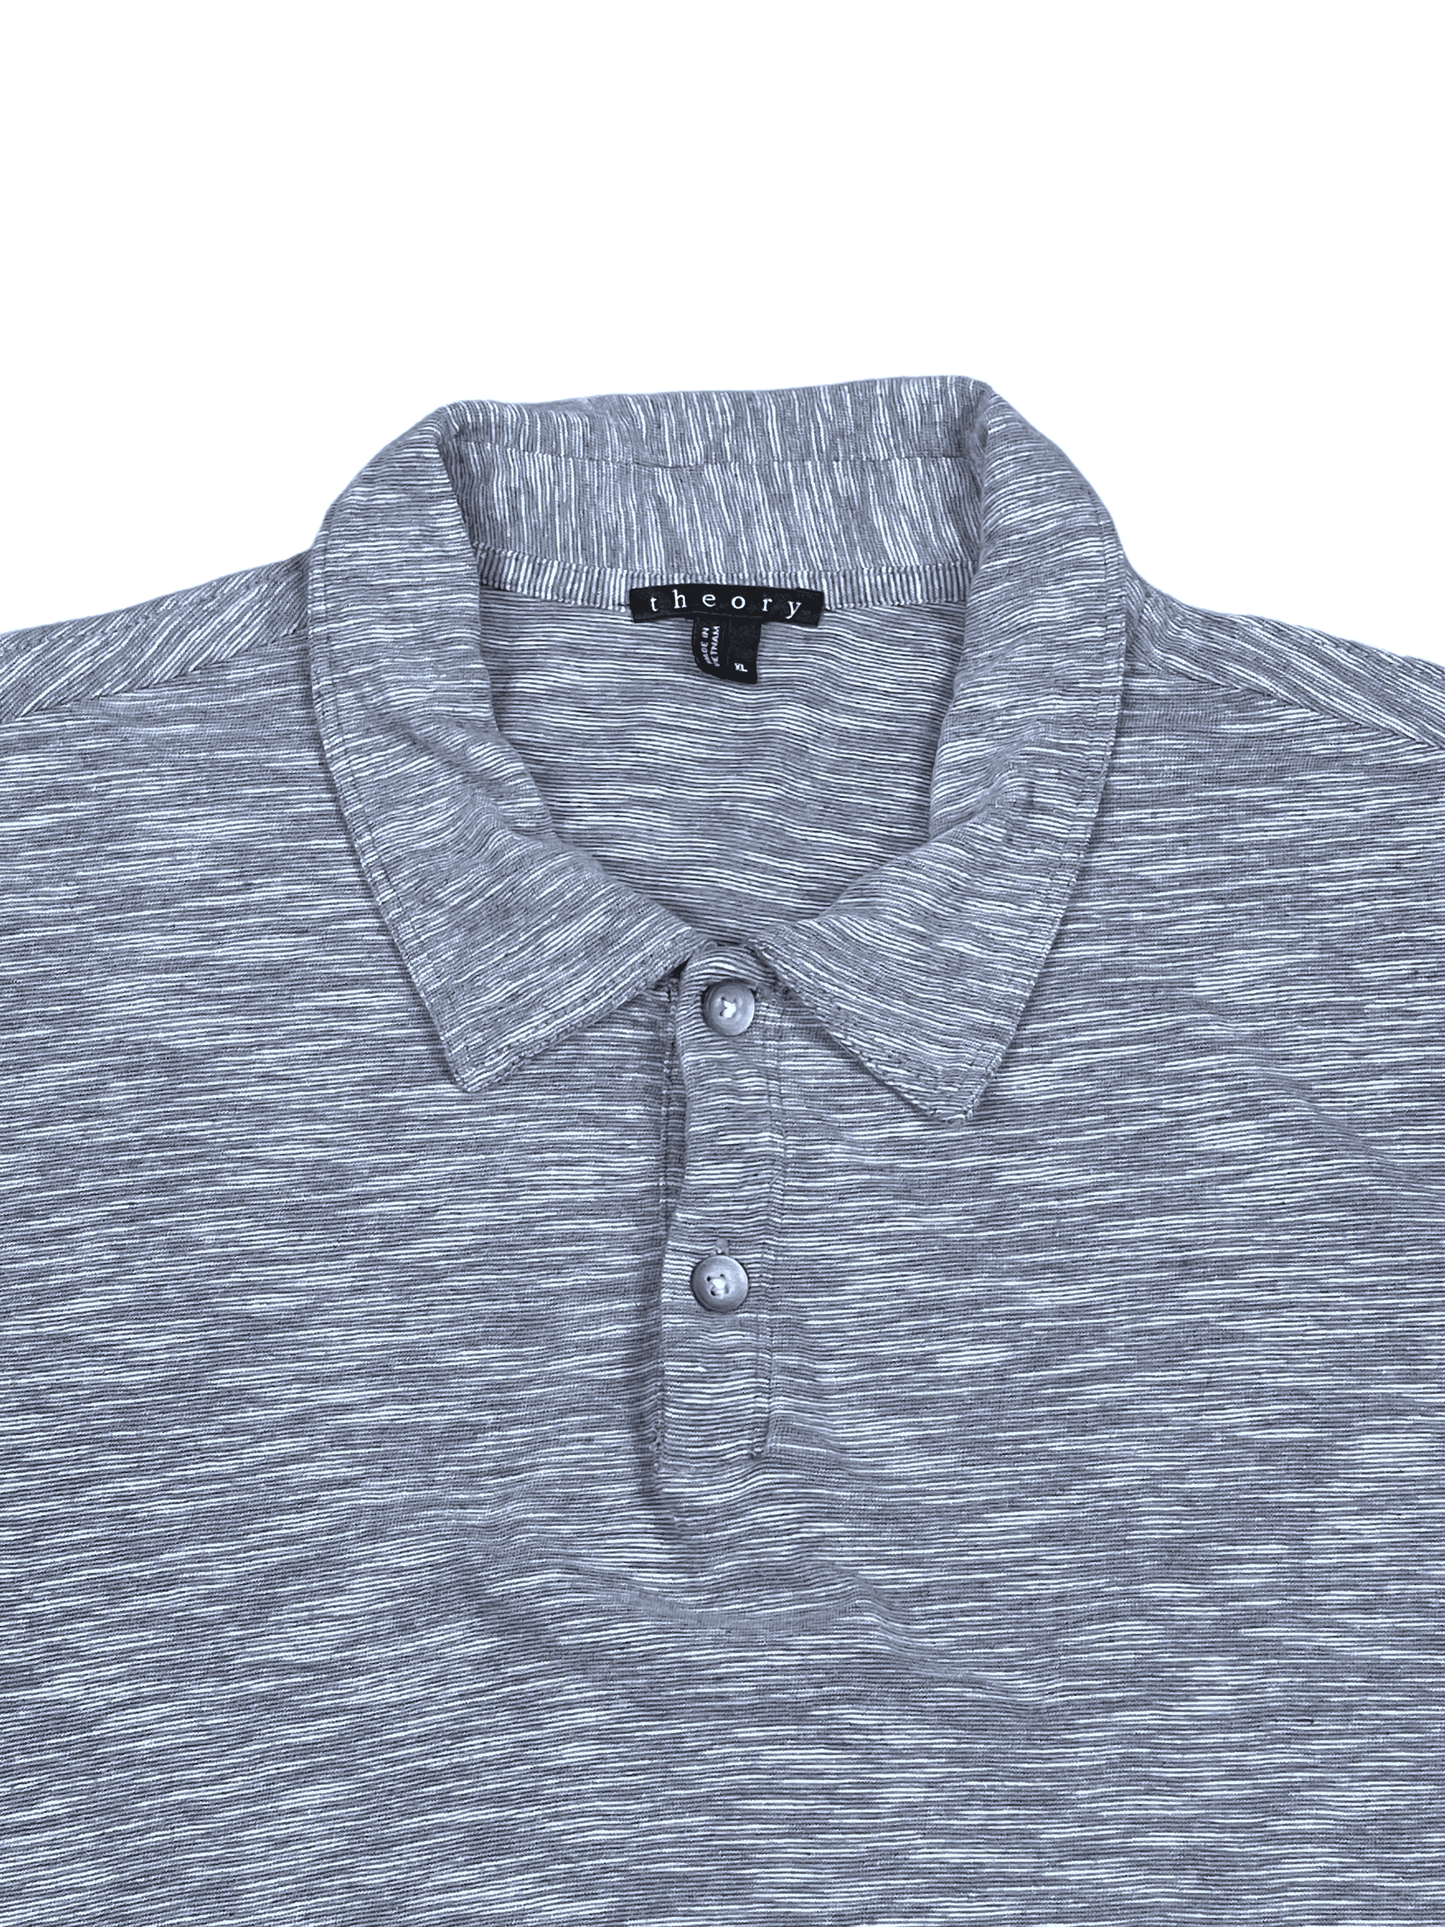 Theory Marled Blue Cotton Polo XL - Genuine Design Luxury Consignment for Men. New & Pre-Owned Clothing, Shoes, & Accessories. Calgary, Canada